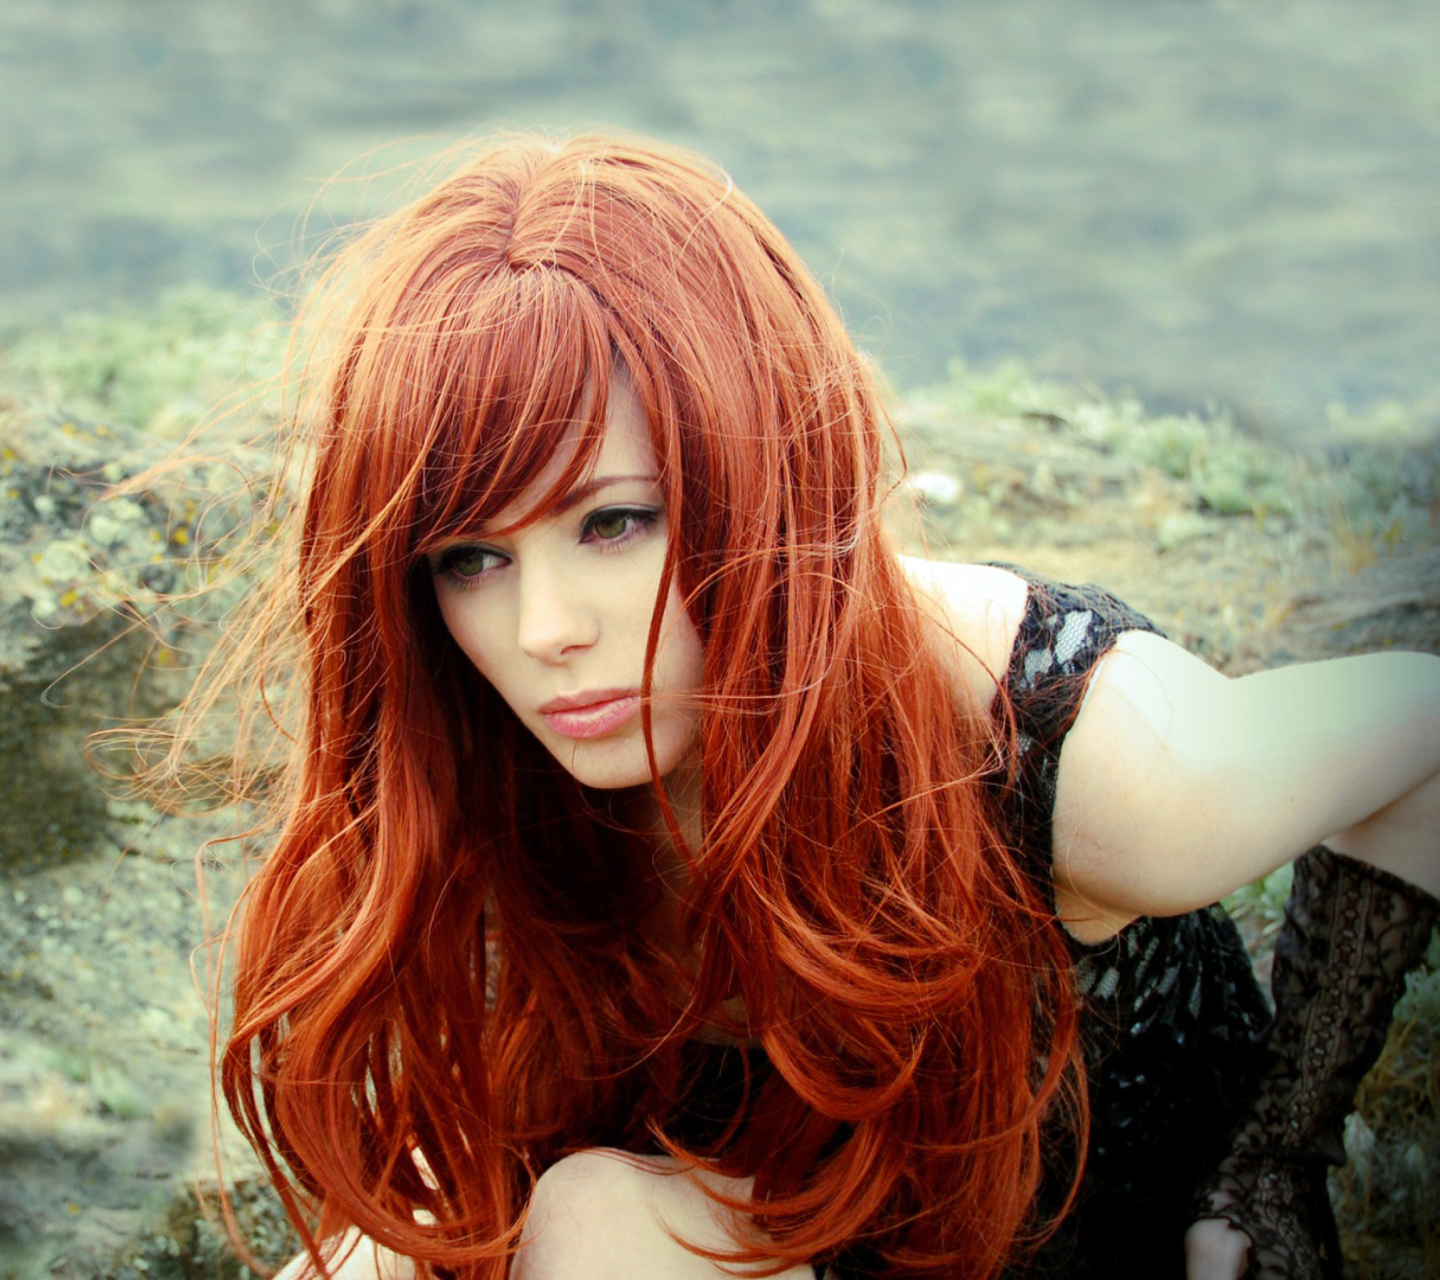 Gorgeous Red Hair Girl With Green Eyes wallpaper 1440x1280